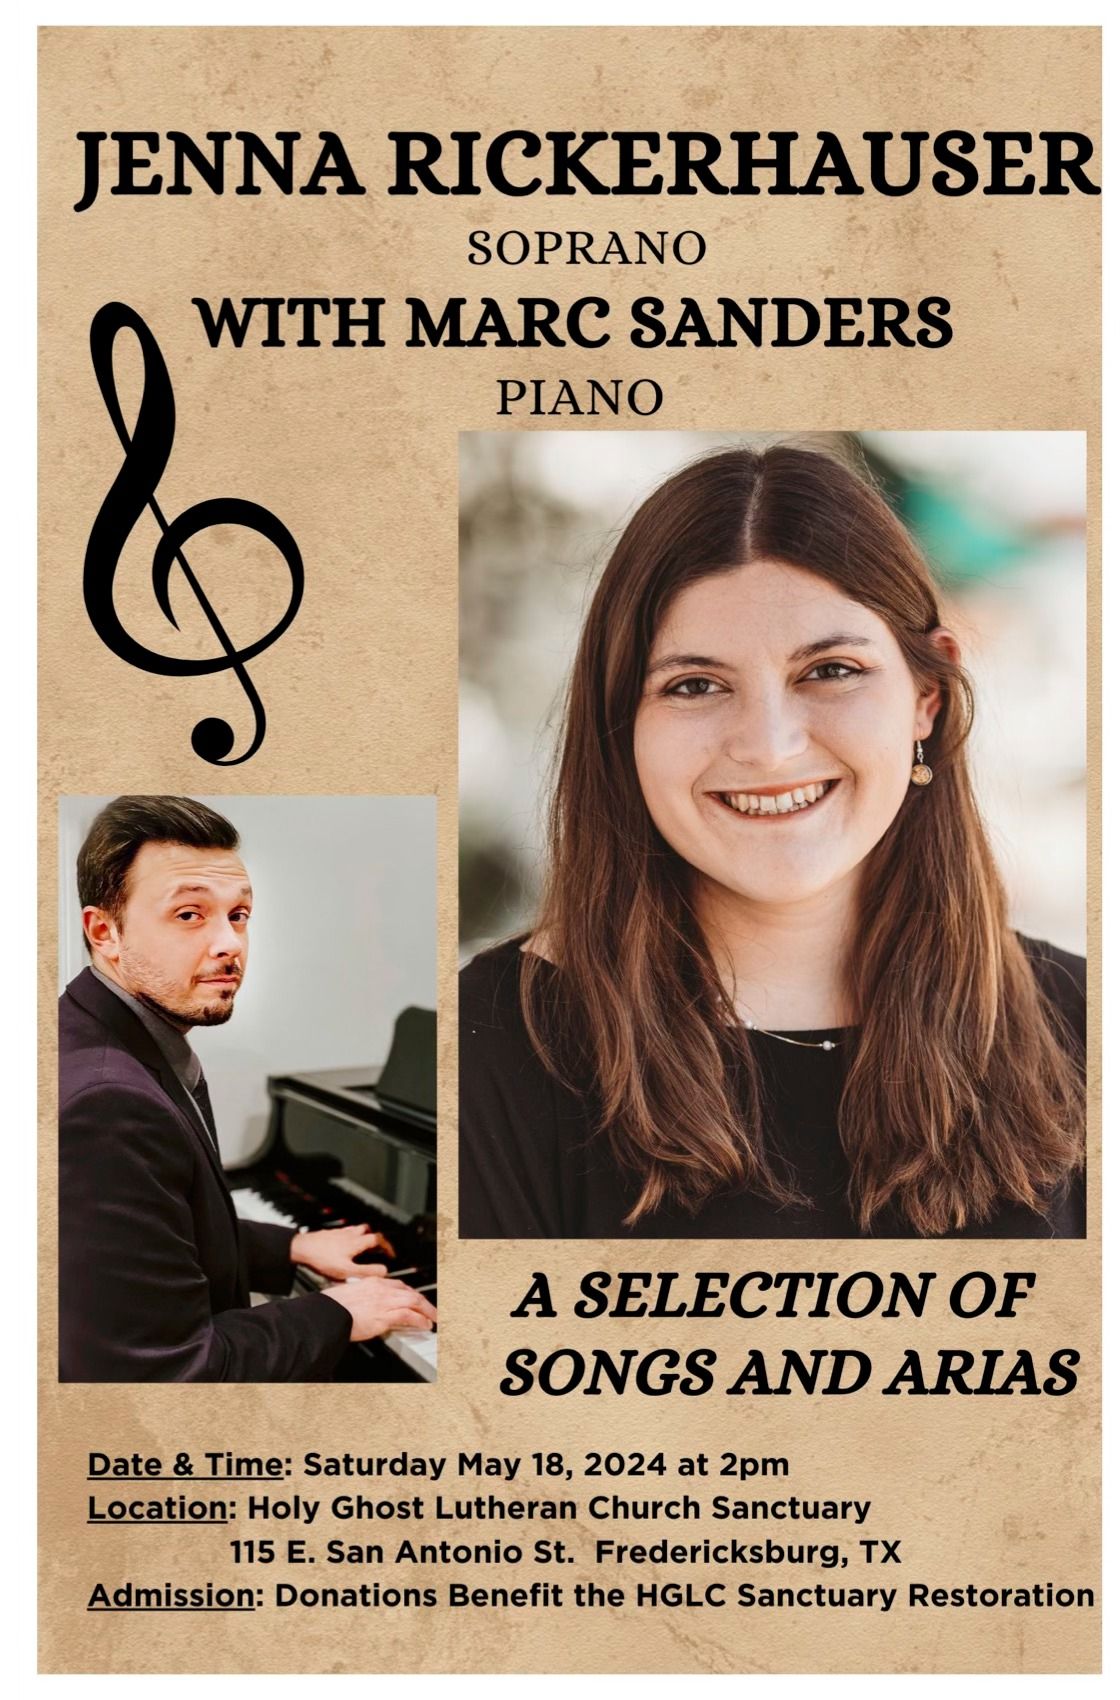 Jenna Rickerhauser: A Selection of Songs and Arias with Pianist Marc Sanders